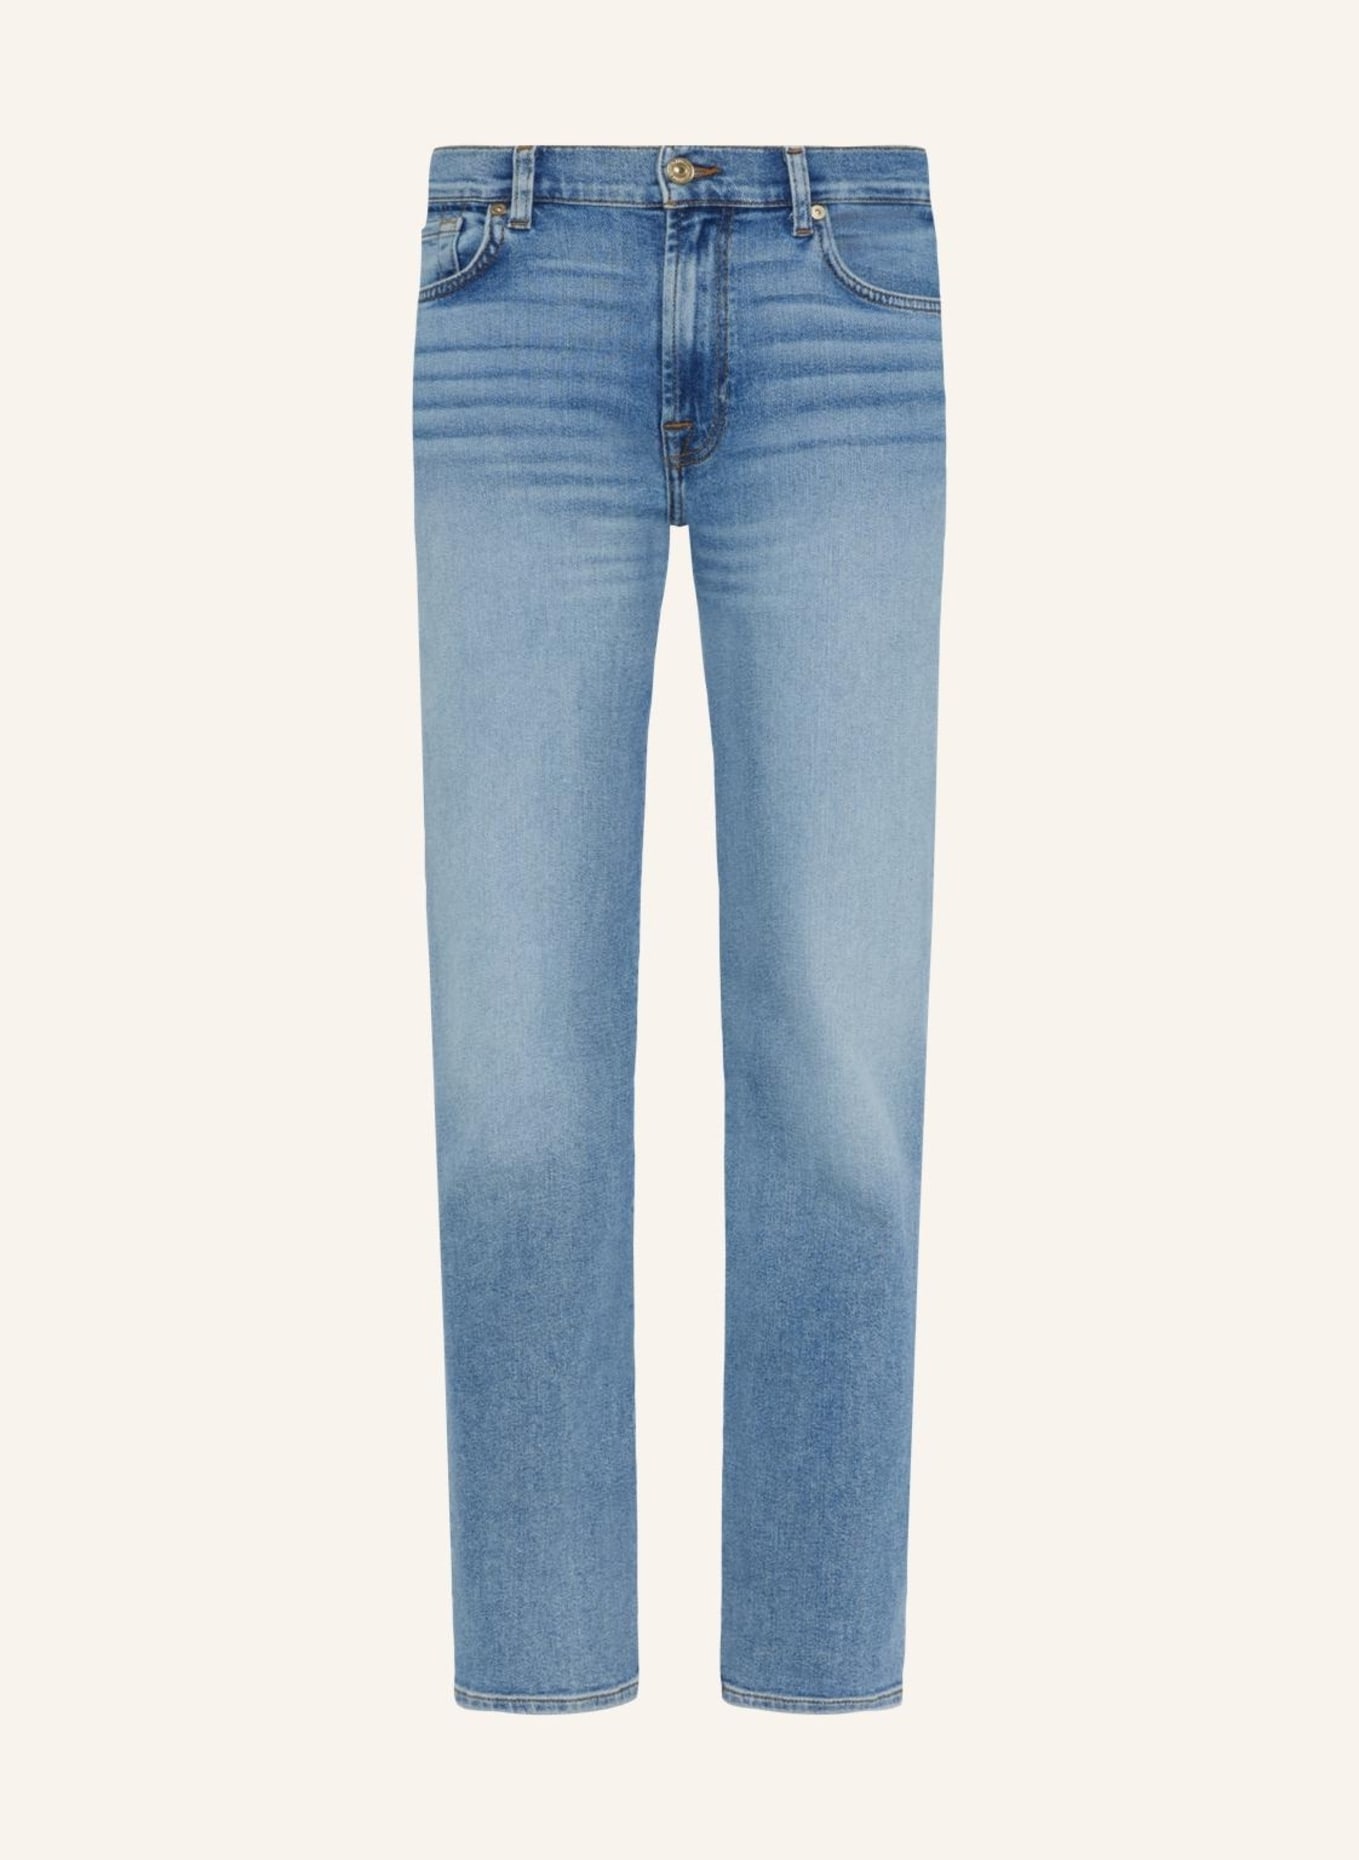 7 for all mankind Jeans ELLIE STRAIGHT Straight fit, Farbe: BLAU (Bild 1)